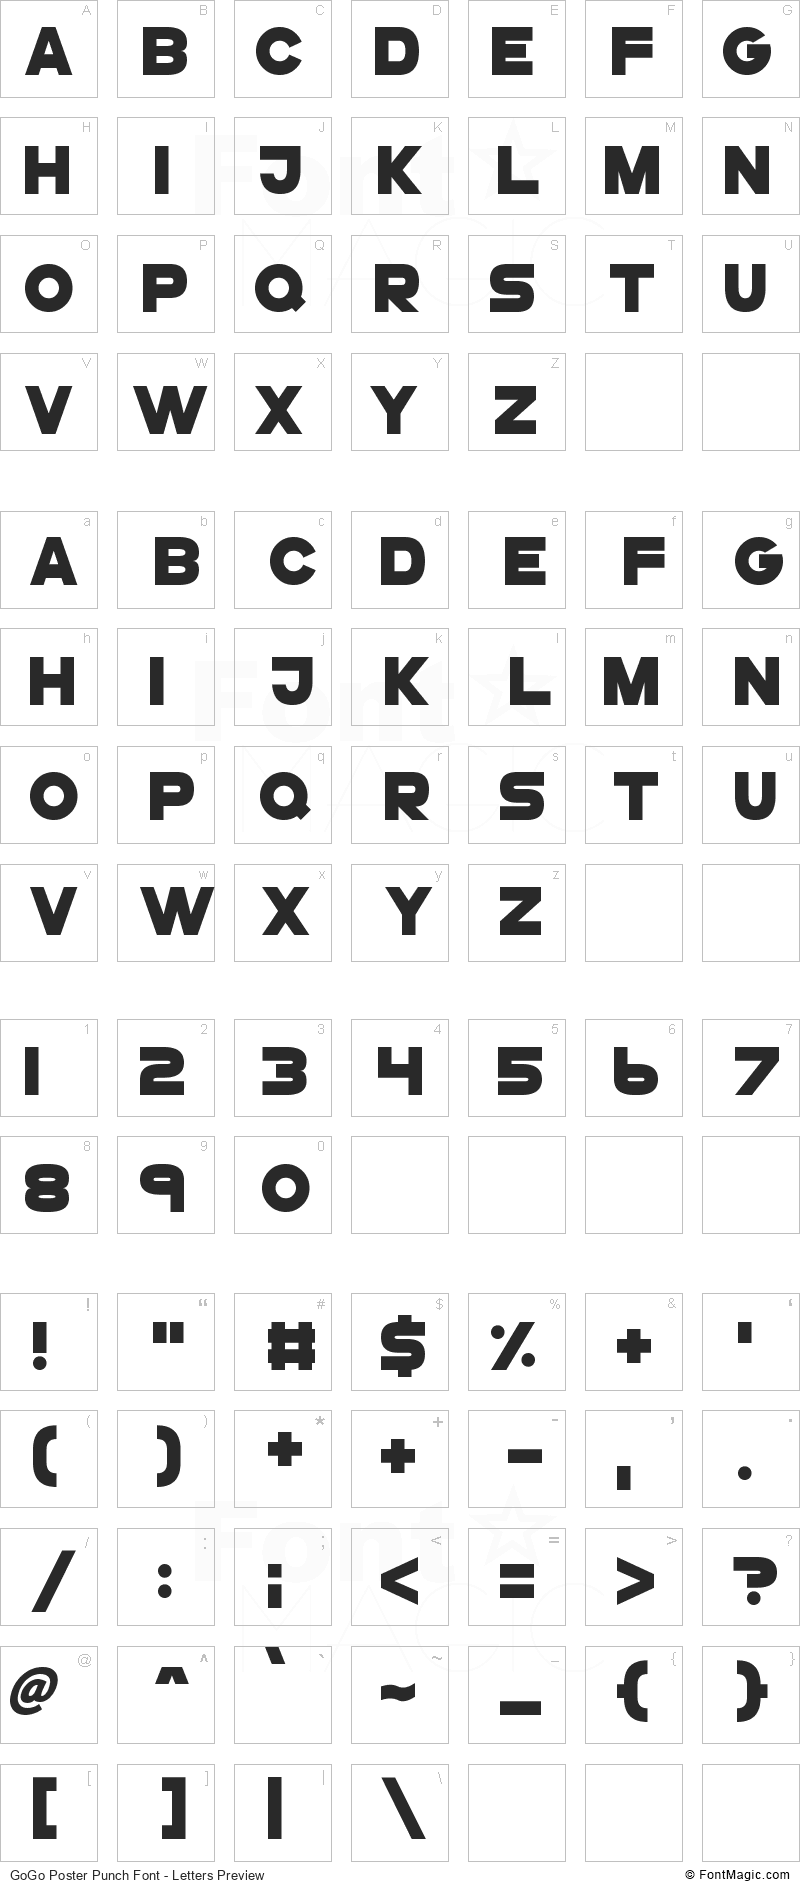 GoGo Poster Punch Font - All Latters Preview Chart